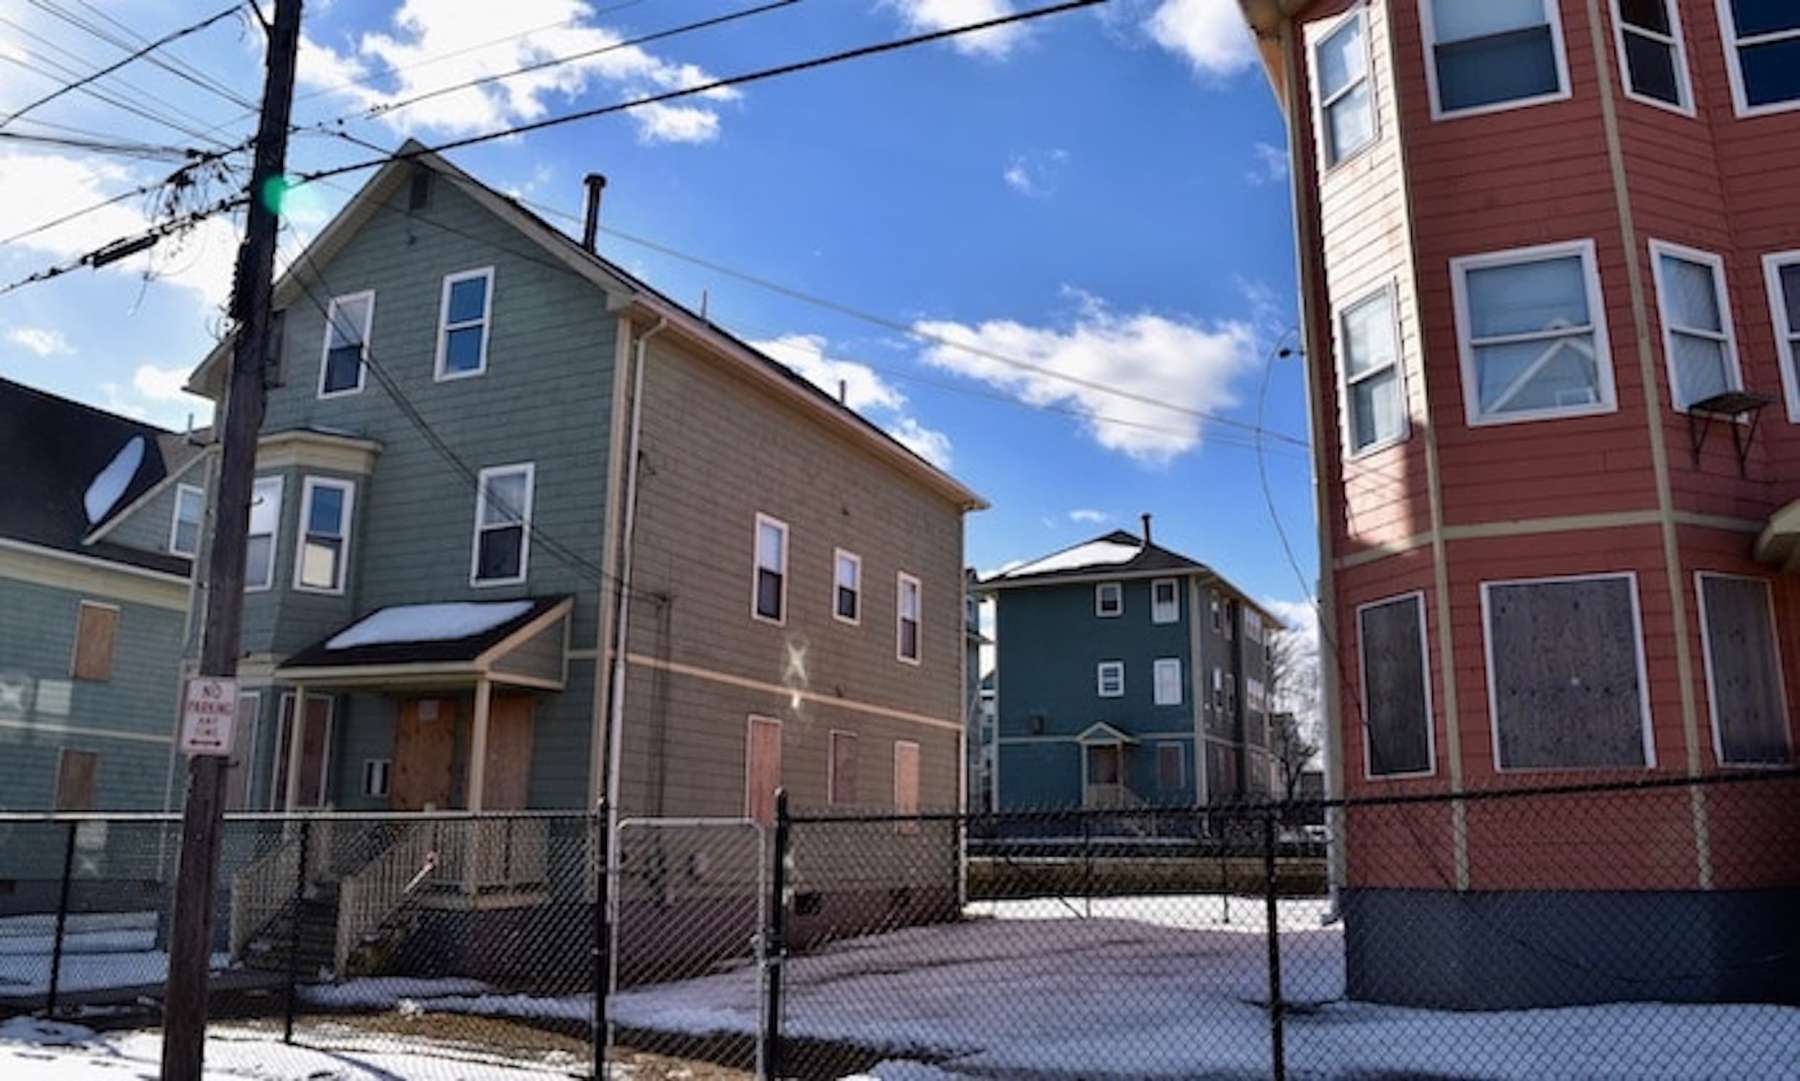 Report: Unless RI acts, hundreds are facing eviction and homelessness